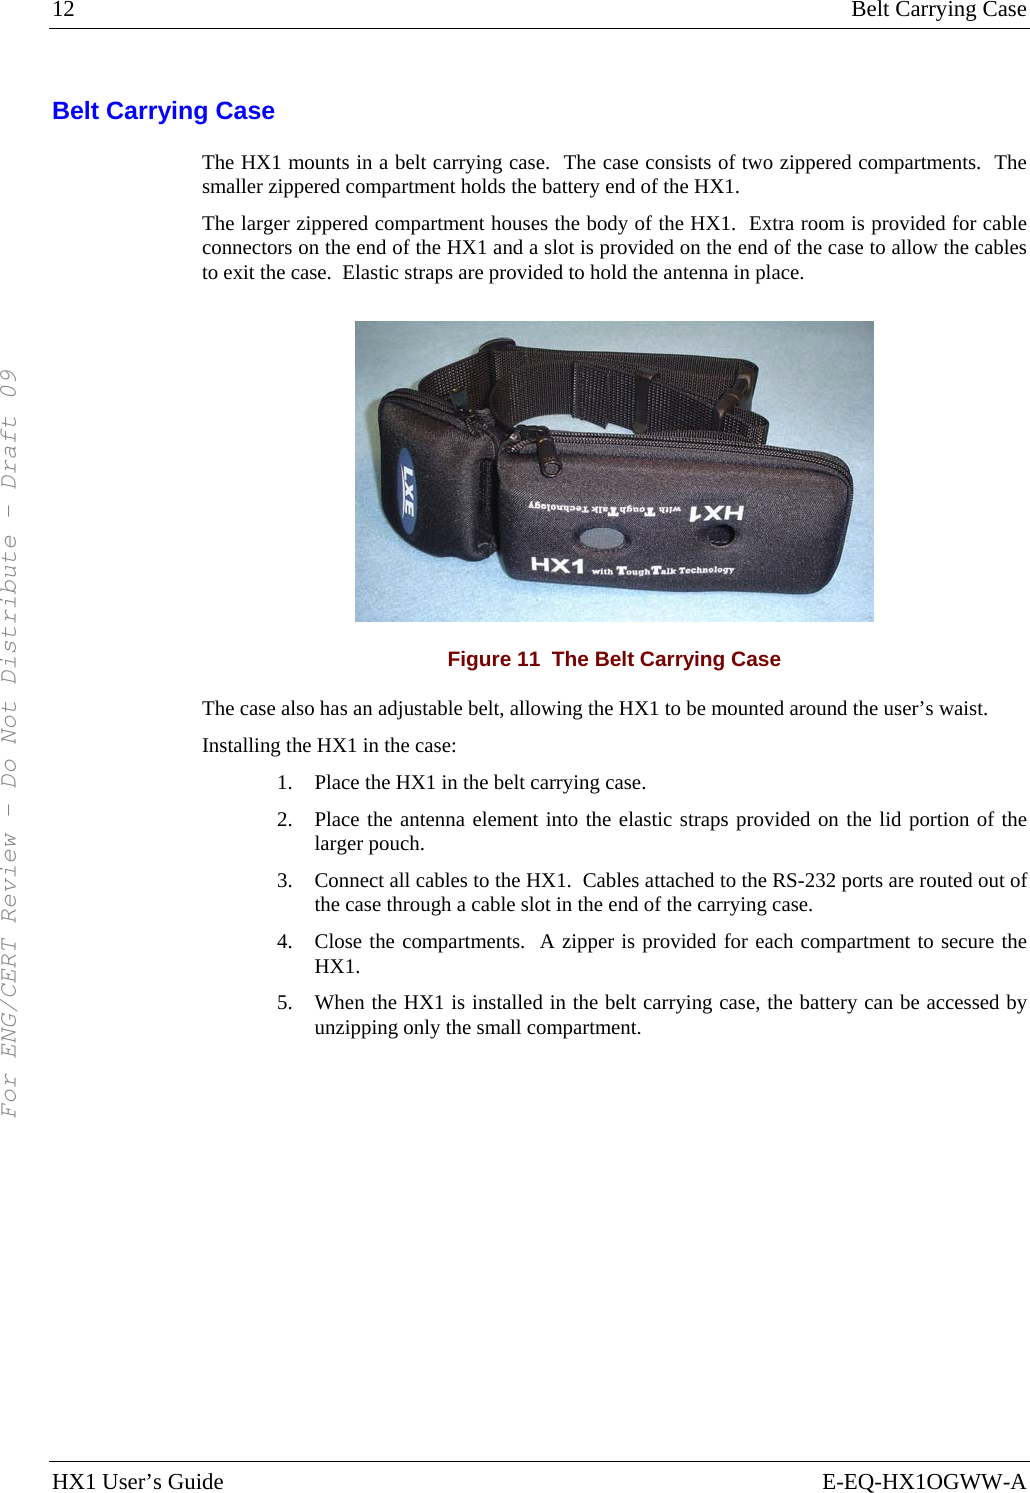 12  Belt Carrying Case HX1 User’s Guide  E-EQ-HX1OGWW-A Belt Carrying Case The HX1 mounts in a belt carrying case.  The case consists of two zippered compartments.  The smaller zippered compartment holds the battery end of the HX1. The larger zippered compartment houses the body of the HX1.  Extra room is provided for cable connectors on the end of the HX1 and a slot is provided on the end of the case to allow the cables to exit the case.  Elastic straps are provided to hold the antenna in place.  Figure 11  The Belt Carrying Case The case also has an adjustable belt, allowing the HX1 to be mounted around the user’s waist. Installing the HX1 in the case: 1. Place the HX1 in the belt carrying case. 2. Place the antenna element into the elastic straps provided on the lid portion of the larger pouch. 3. Connect all cables to the HX1.  Cables attached to the RS-232 ports are routed out of the case through a cable slot in the end of the carrying case. 4. Close the compartments.  A zipper is provided for each compartment to secure the HX1. 5. When the HX1 is installed in the belt carrying case, the battery can be accessed by unzipping only the small compartment. For ENG/CERT Review - Do Not Distribute - Draft 09